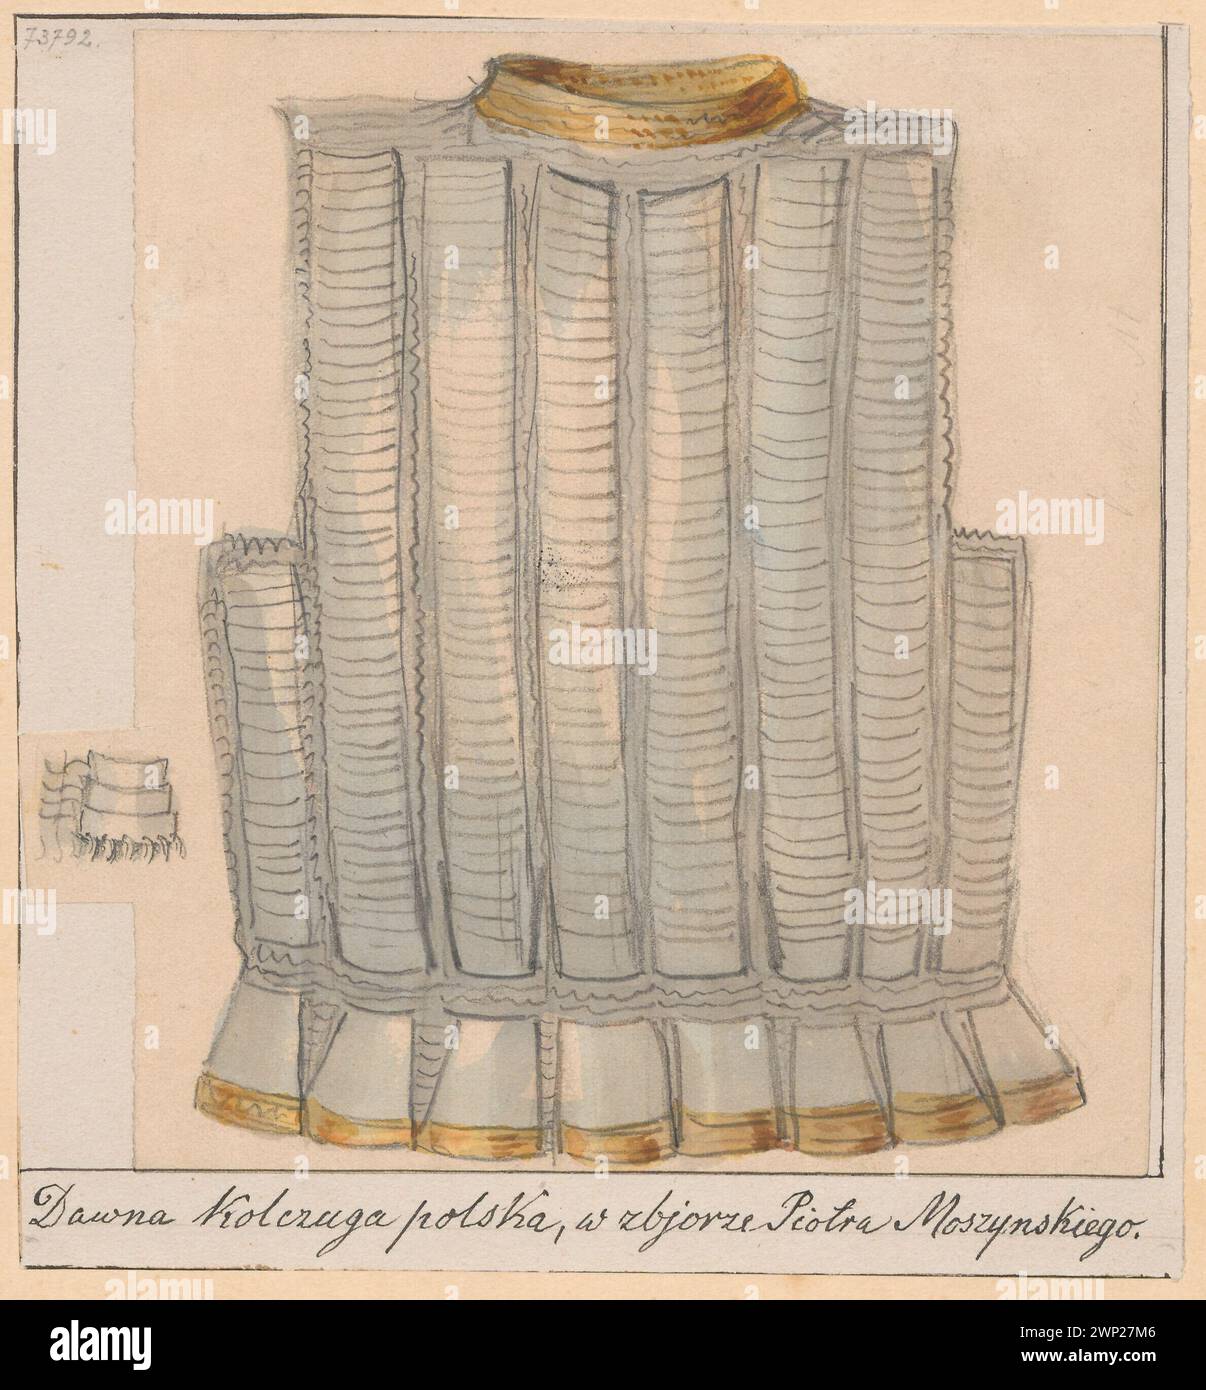 A former Polish chain mail (Bechter) from the collection of Piotr Moszy Lesser, Aleksander (1814-1884); 1830-1883 (1830-00-00-1883-00-00);Kazimierz (Kraków - district), Lesser, Aleksander (1814-1884), Lesser, Wiktor Stanisław Zygmunt (Baron - 1853-1935), Moszyński, Piotr (1800-1879) - collections, Bechter (Militaria), Dar (provenance), Chainquet, Church of St. Jana (Vilnius), Militaria, armor, crafts, armor, knight armor Stock Photo